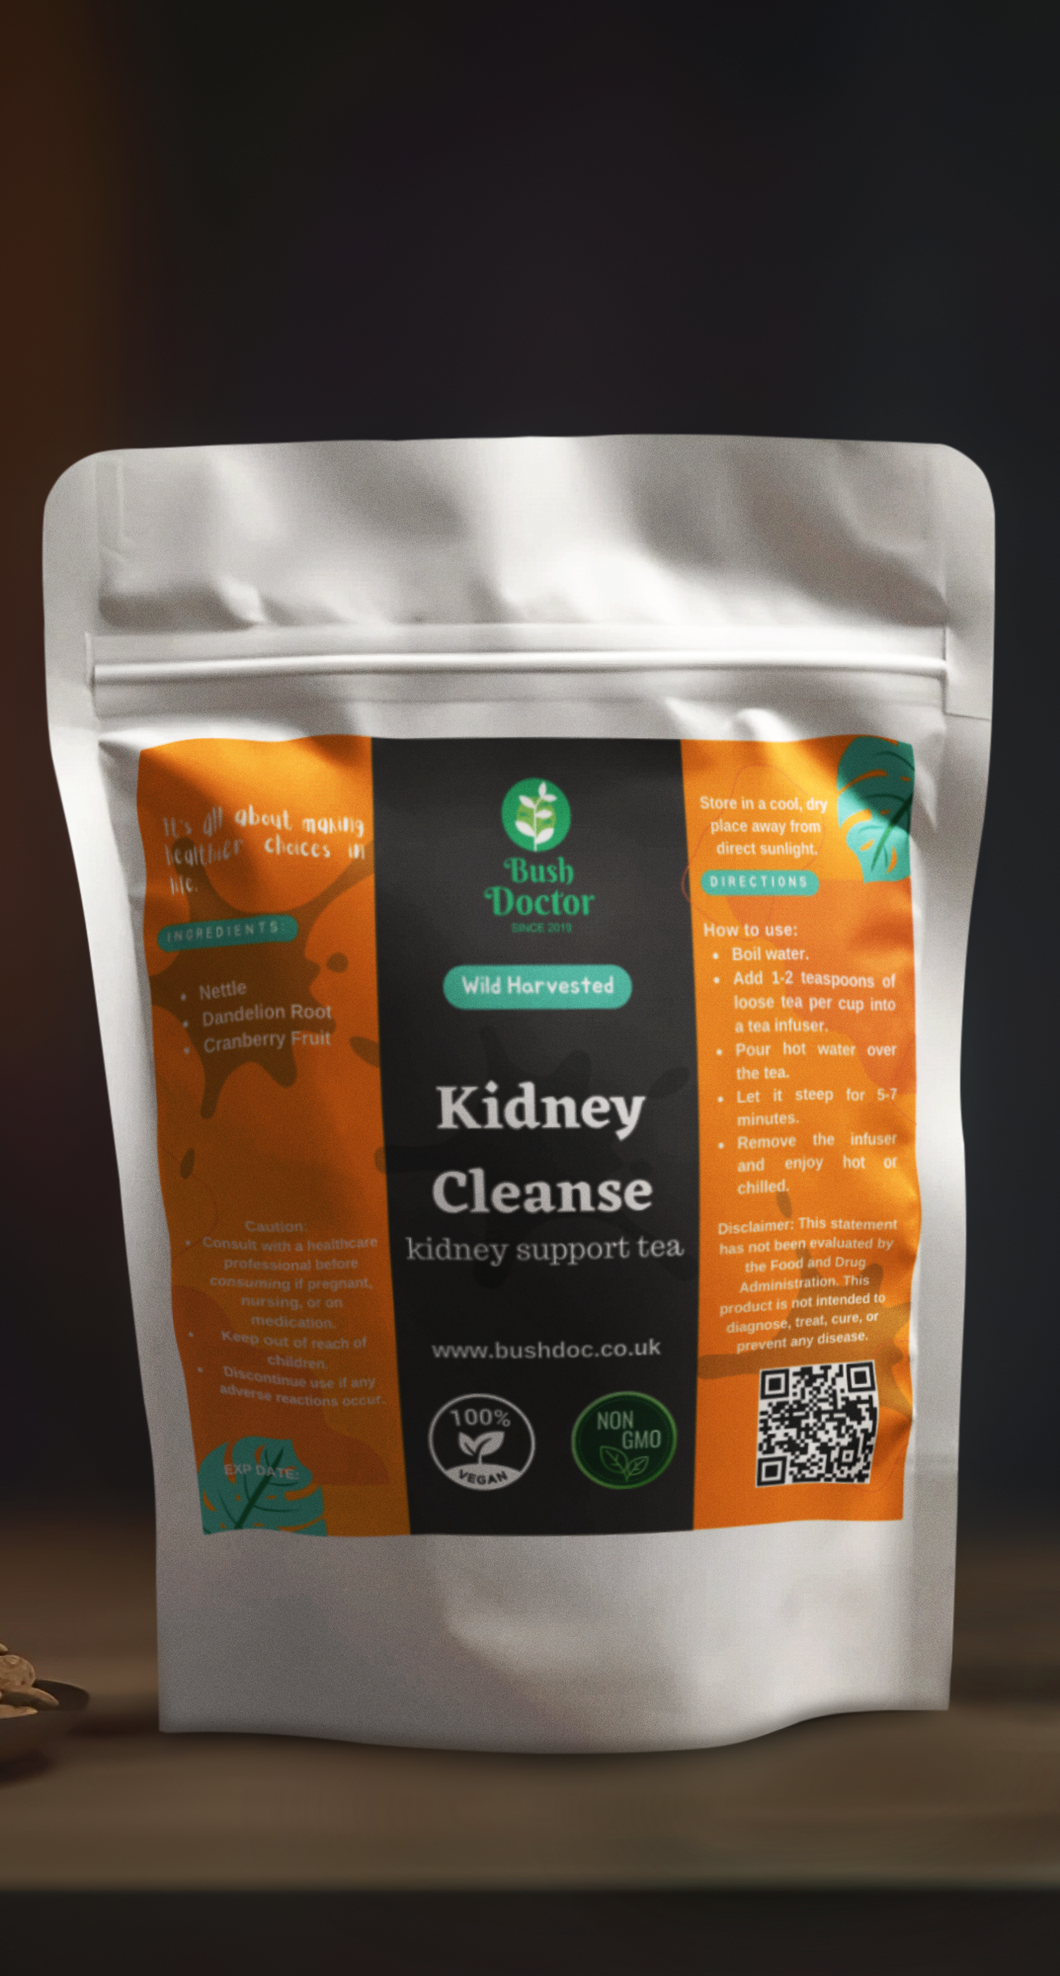 Kidney Cleanse - Support Urinary & Kidney Health Naturally (Loose Leaf Tea)